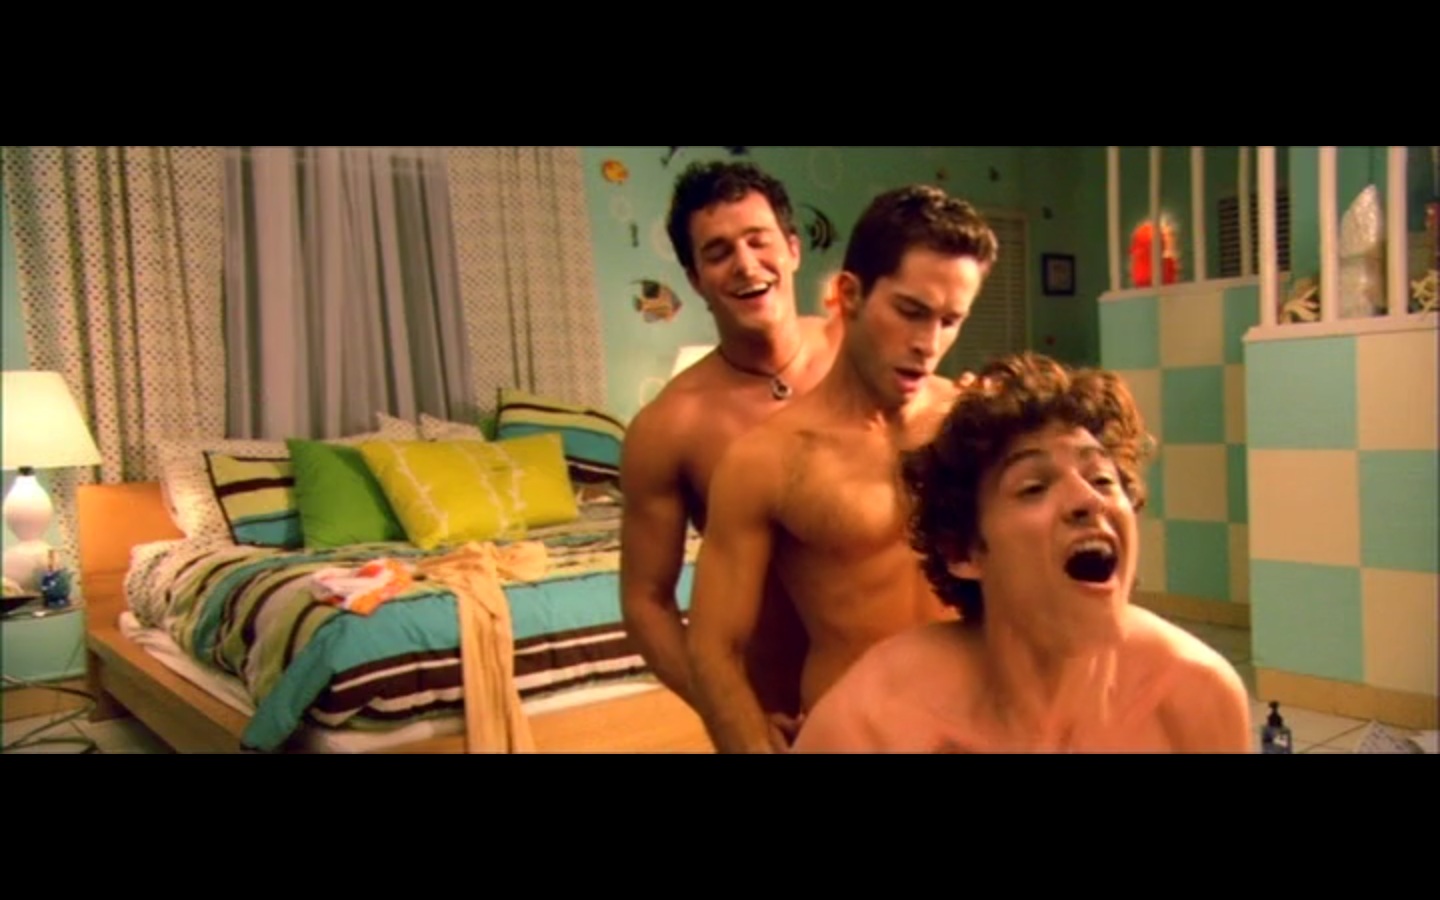 Another Gay Sequel: Gays Gone Wild - Aaron Michael Davies, Jimmy Clabots, C...